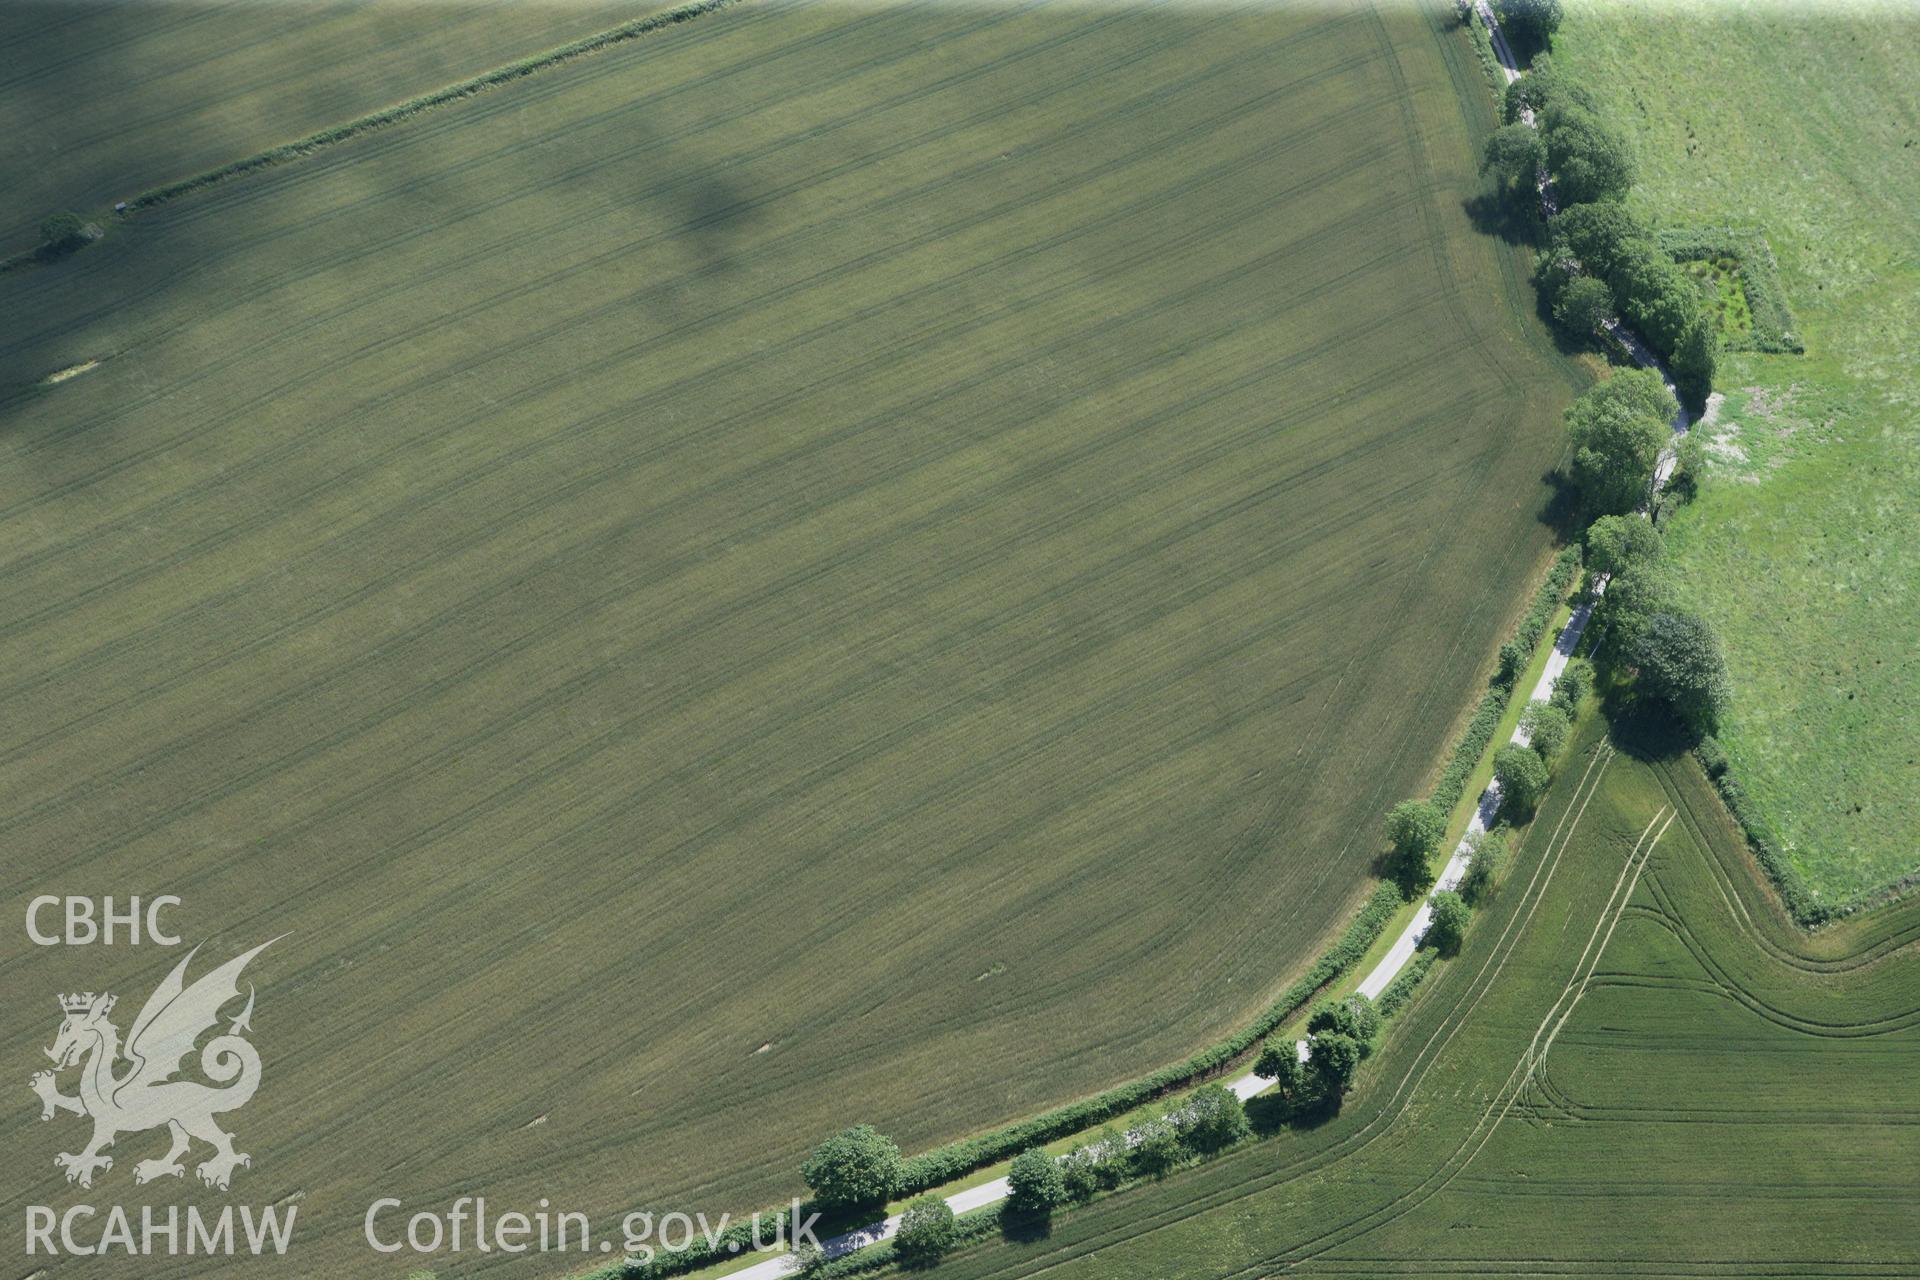 RCAHMW colour oblique photograph of Cawrence Cropmark Enclosure. Taken by Toby Driver and Oliver Davies on 28/06/2011.